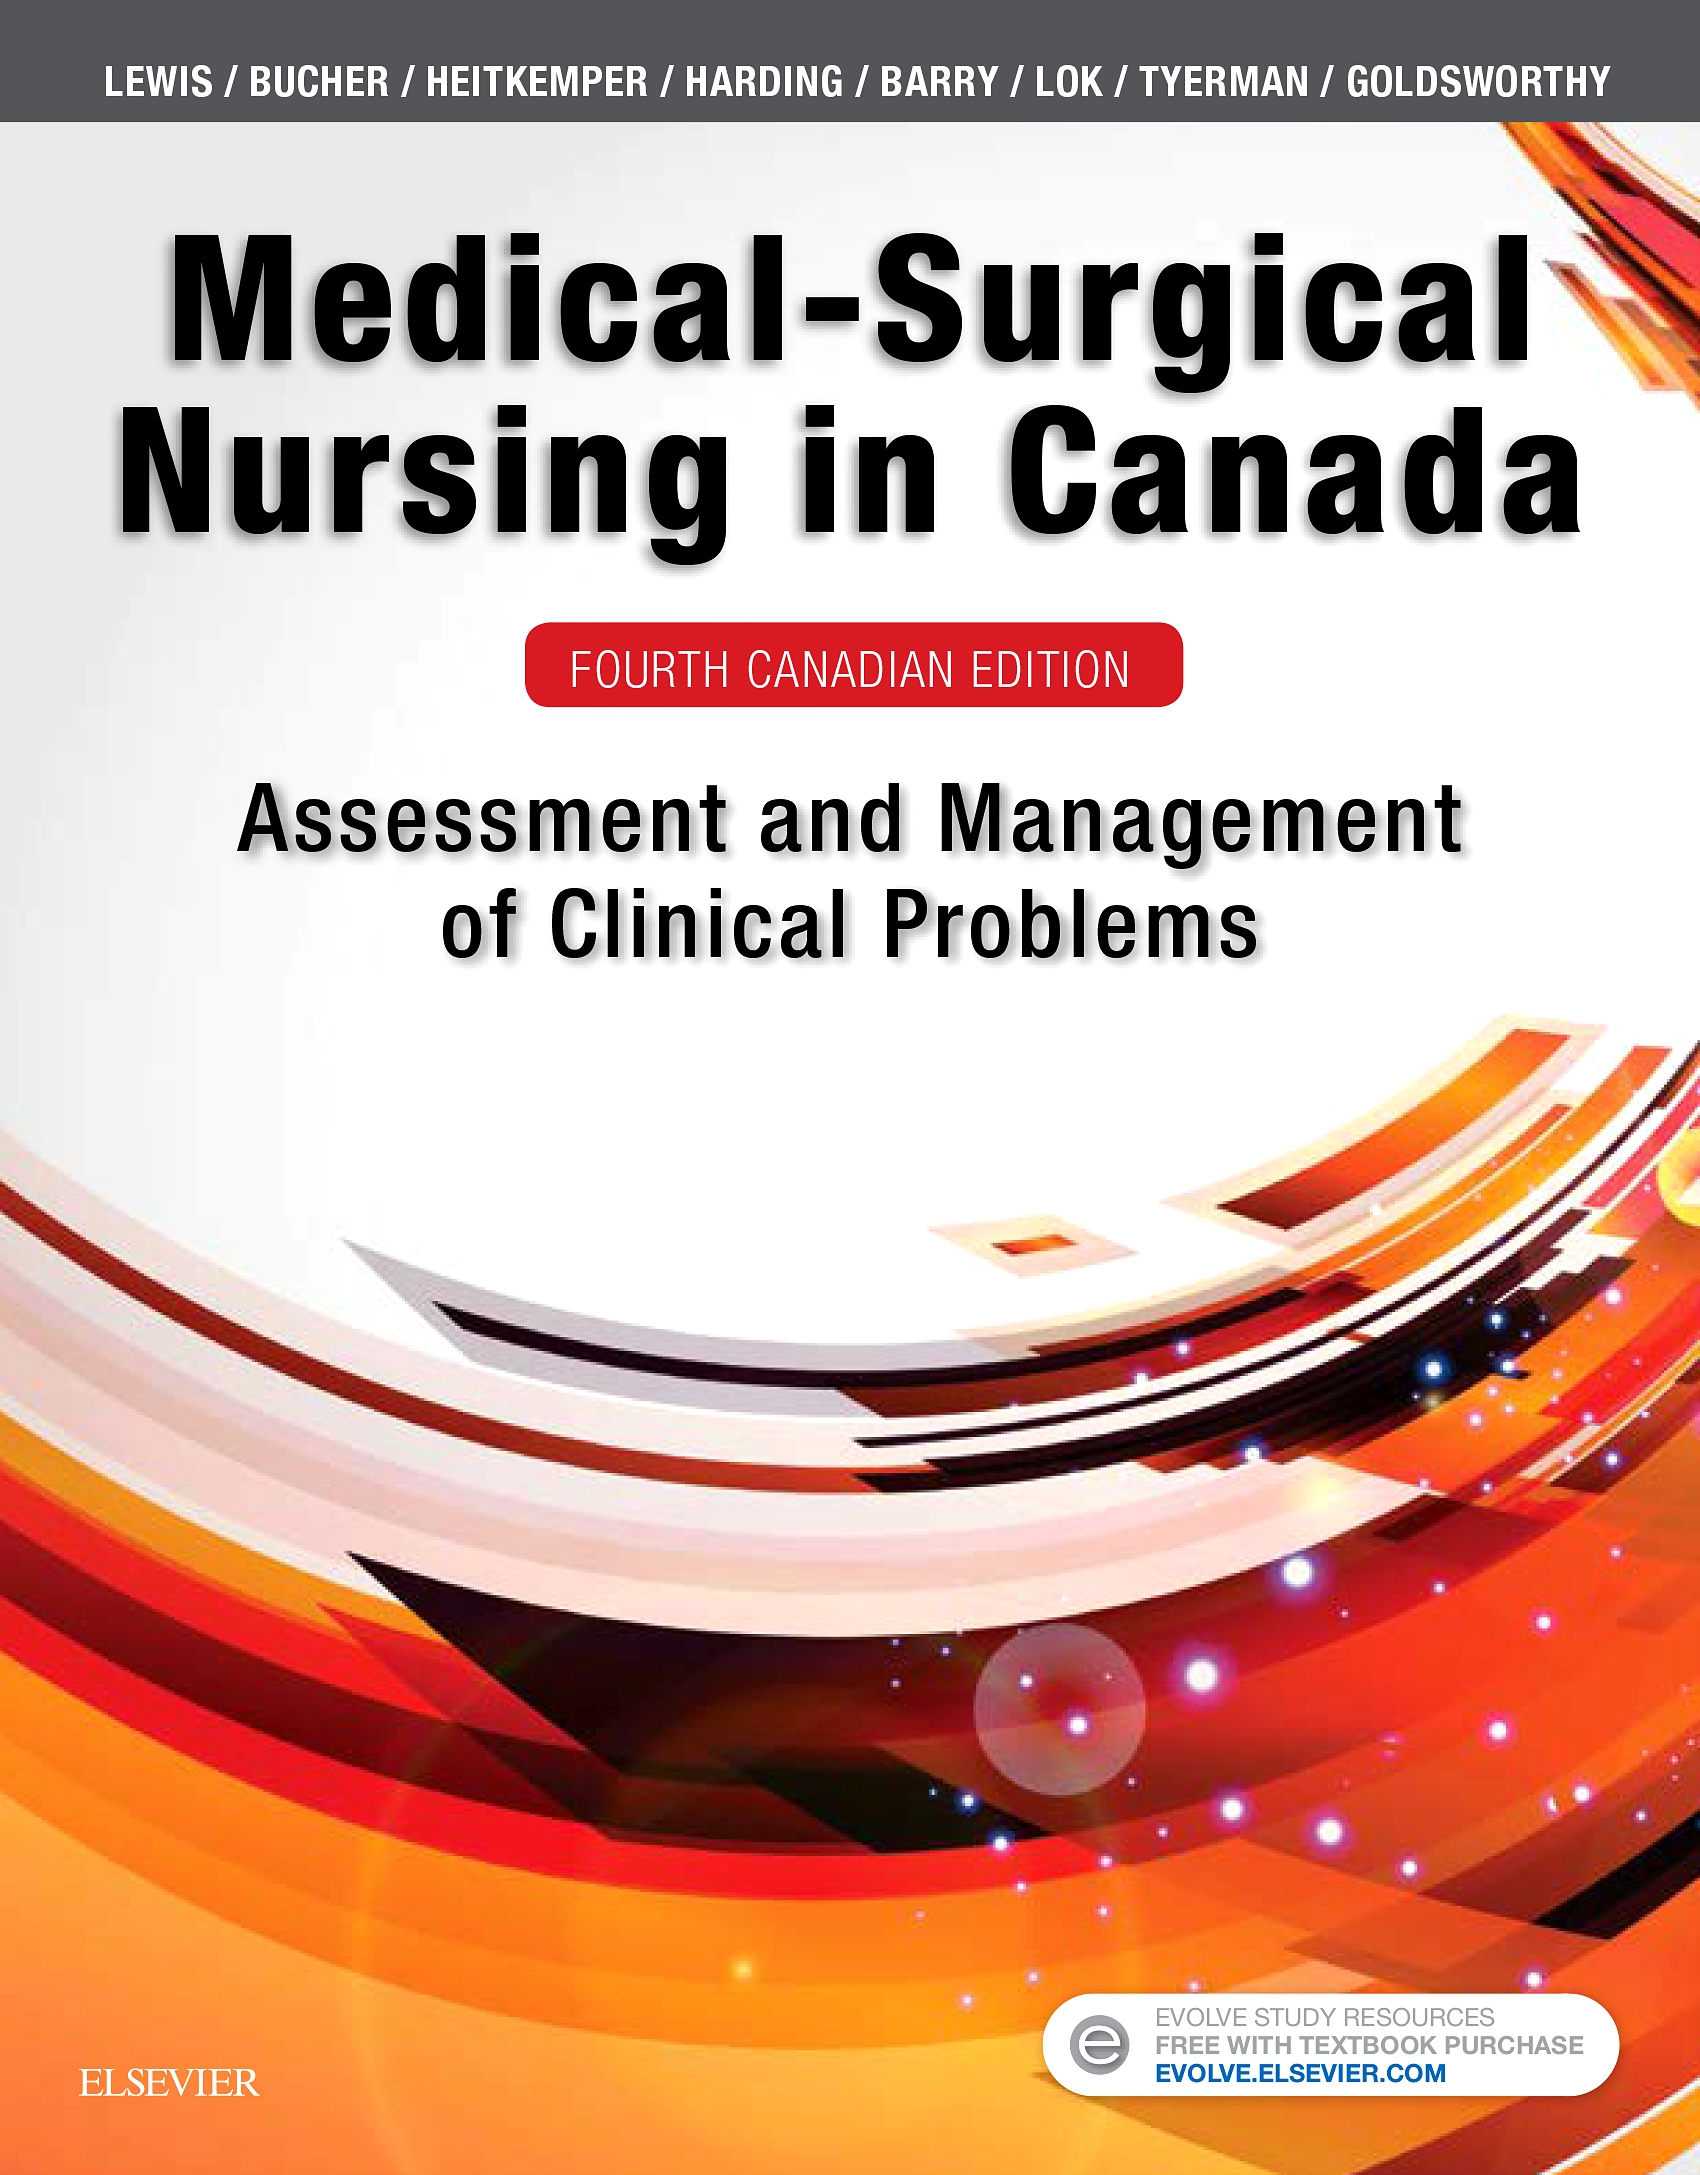 Evolve Resources for Medical-Surgical Nursing in Canada, 4th Edition